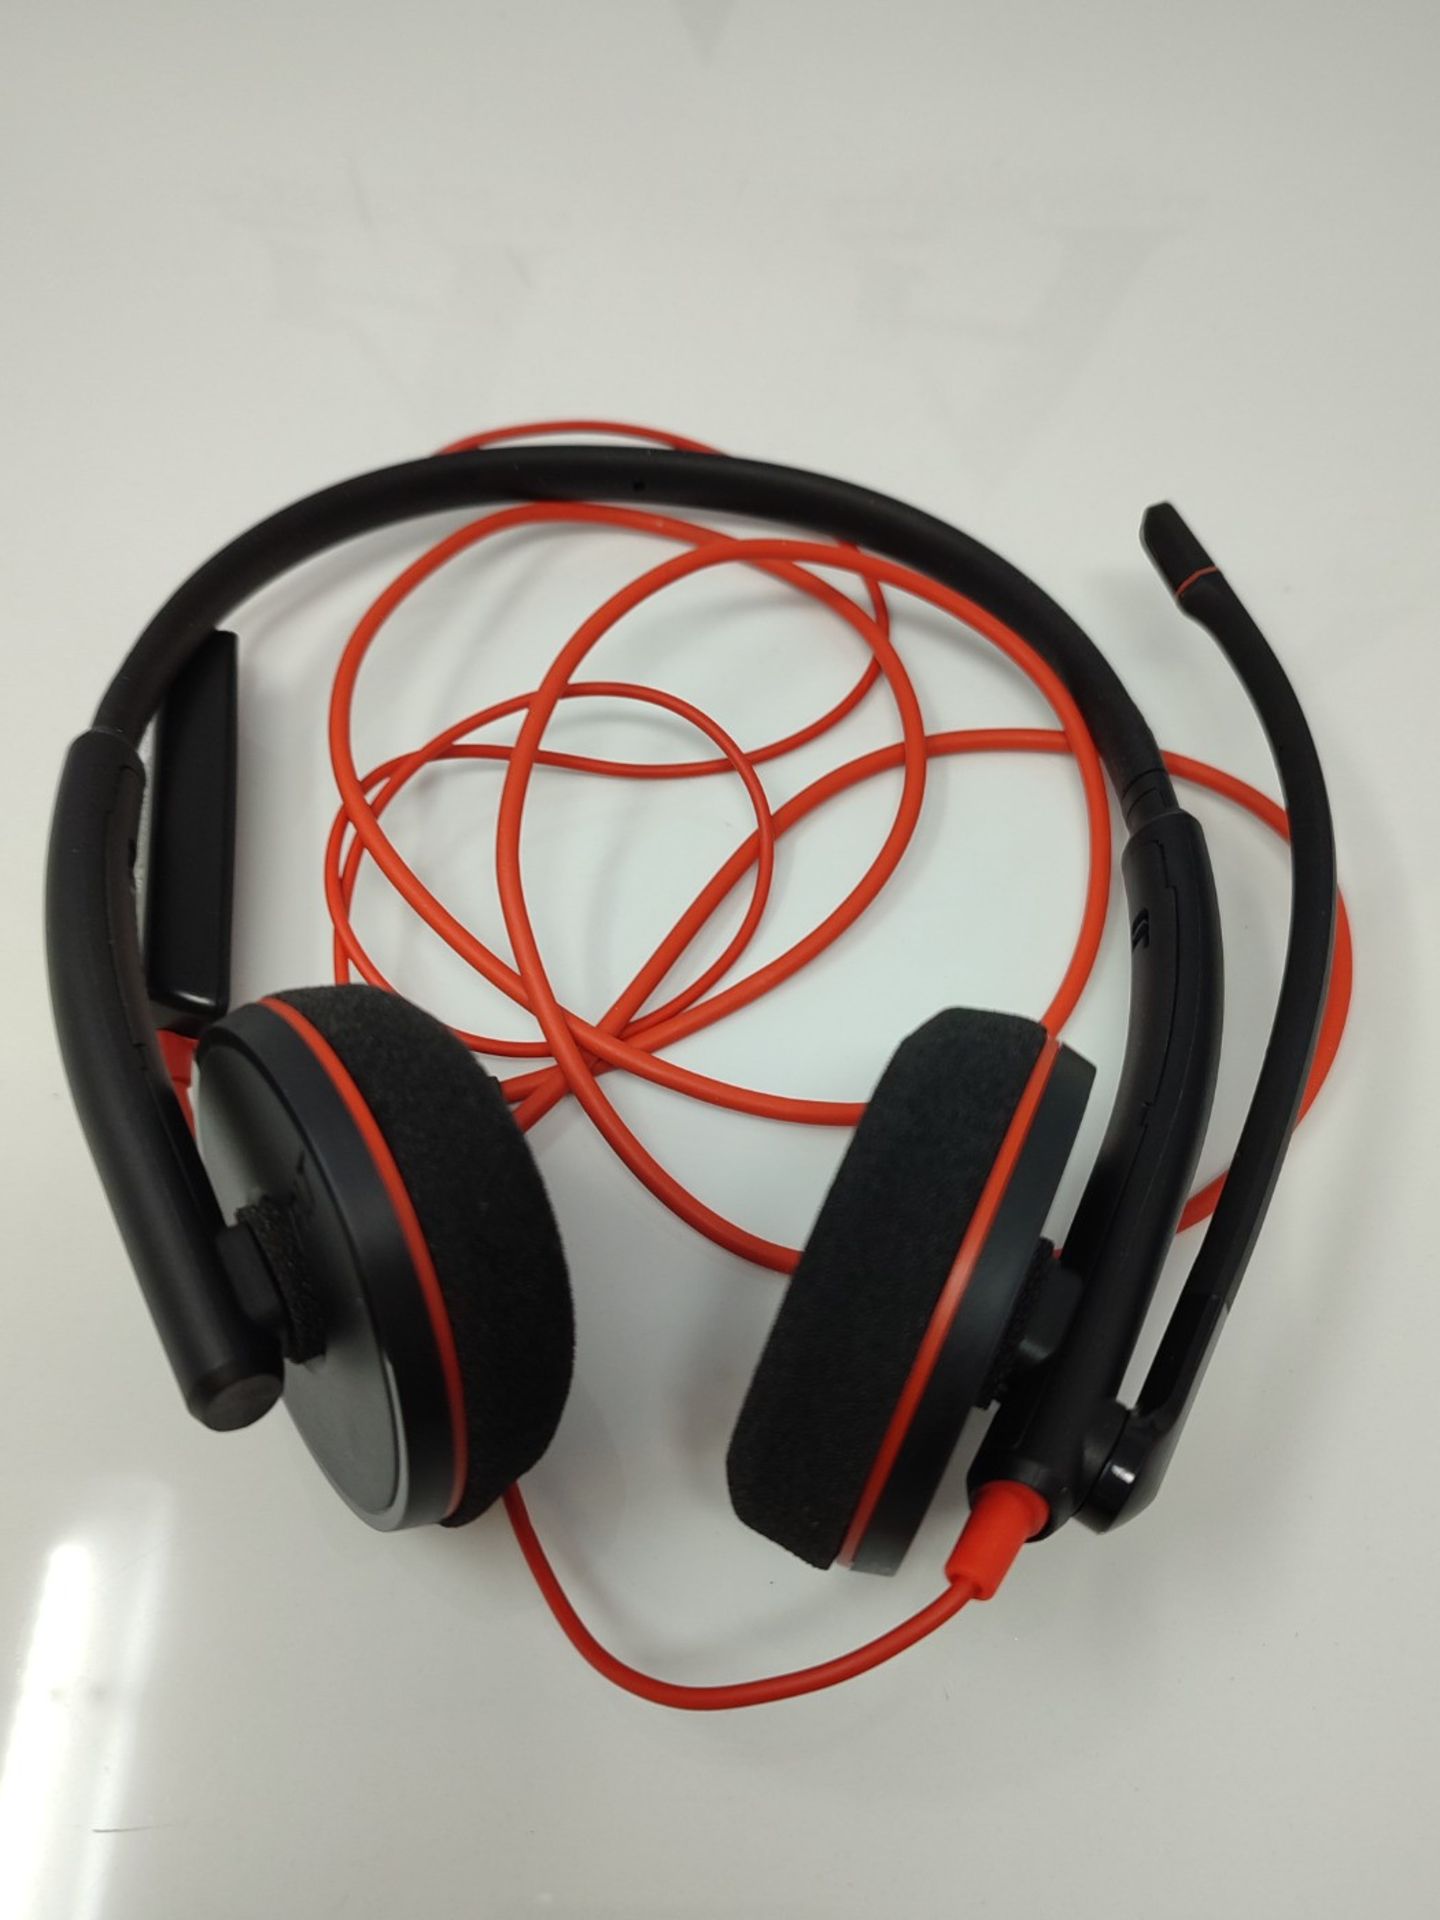 Plantronics - Blackwire 3220 - Wired Dual-Ear (Stereo) Headset with Boom Mic - USB-C t - Image 3 of 3